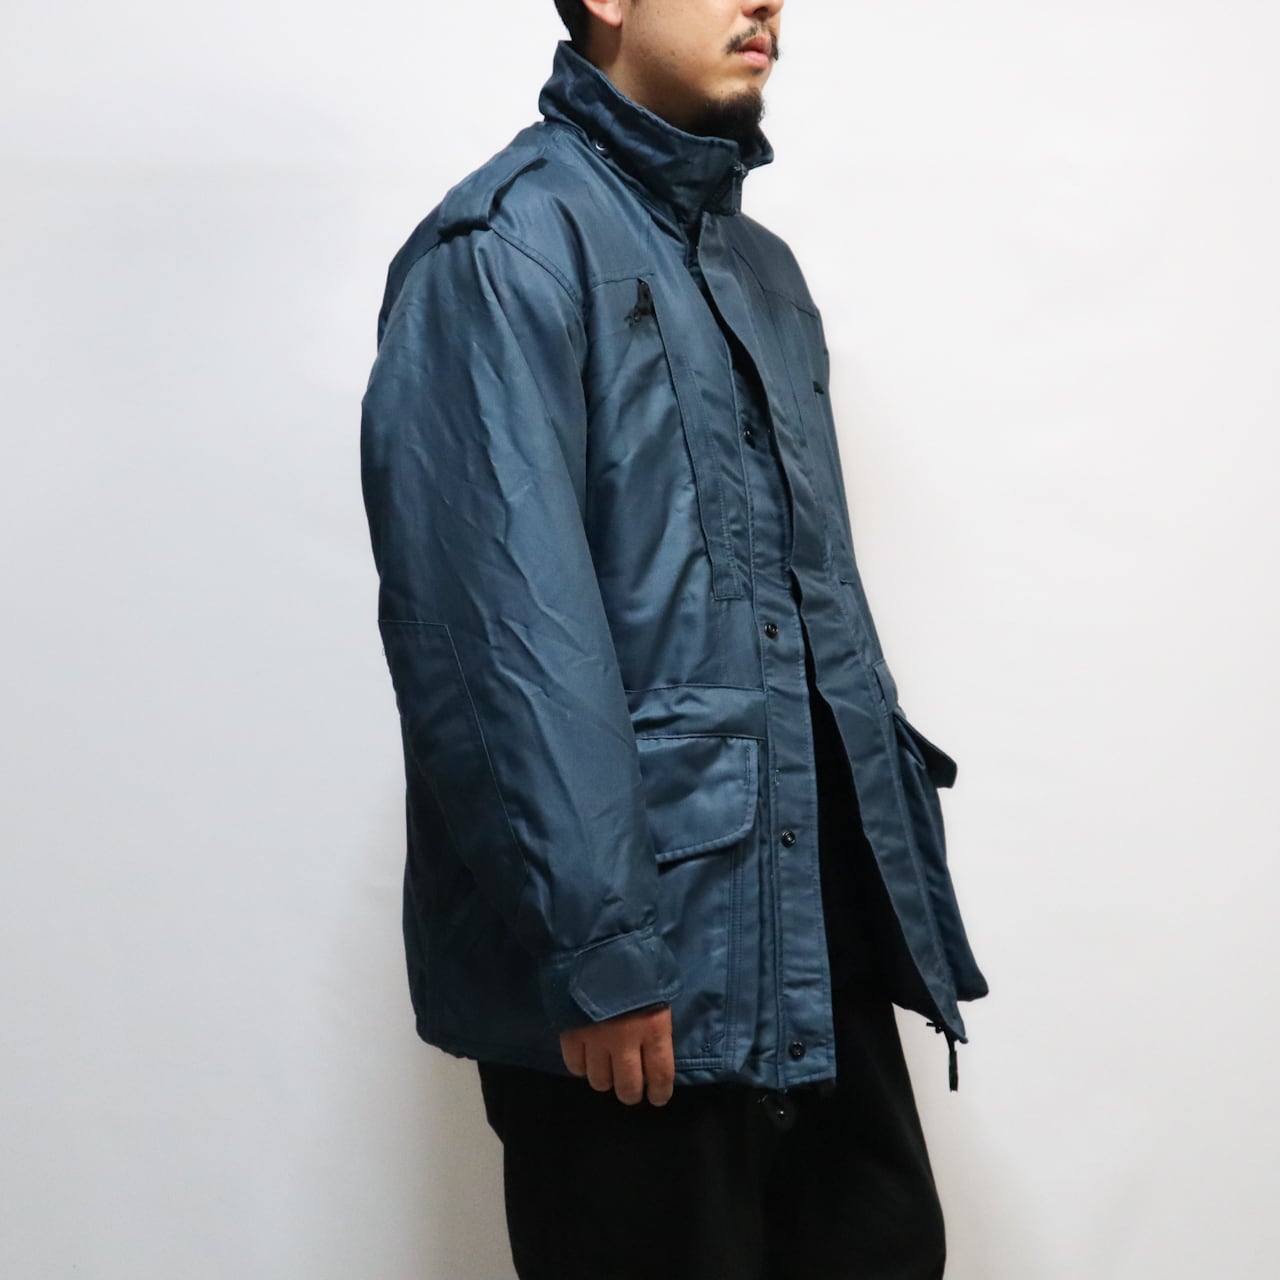 【DEADSTOCK】CANADIAN ROYAL AIR FORCE COLD & WET WEATHER PARKA カナディアンゴアテックス  カナダ軍 ロイヤルエアフォース